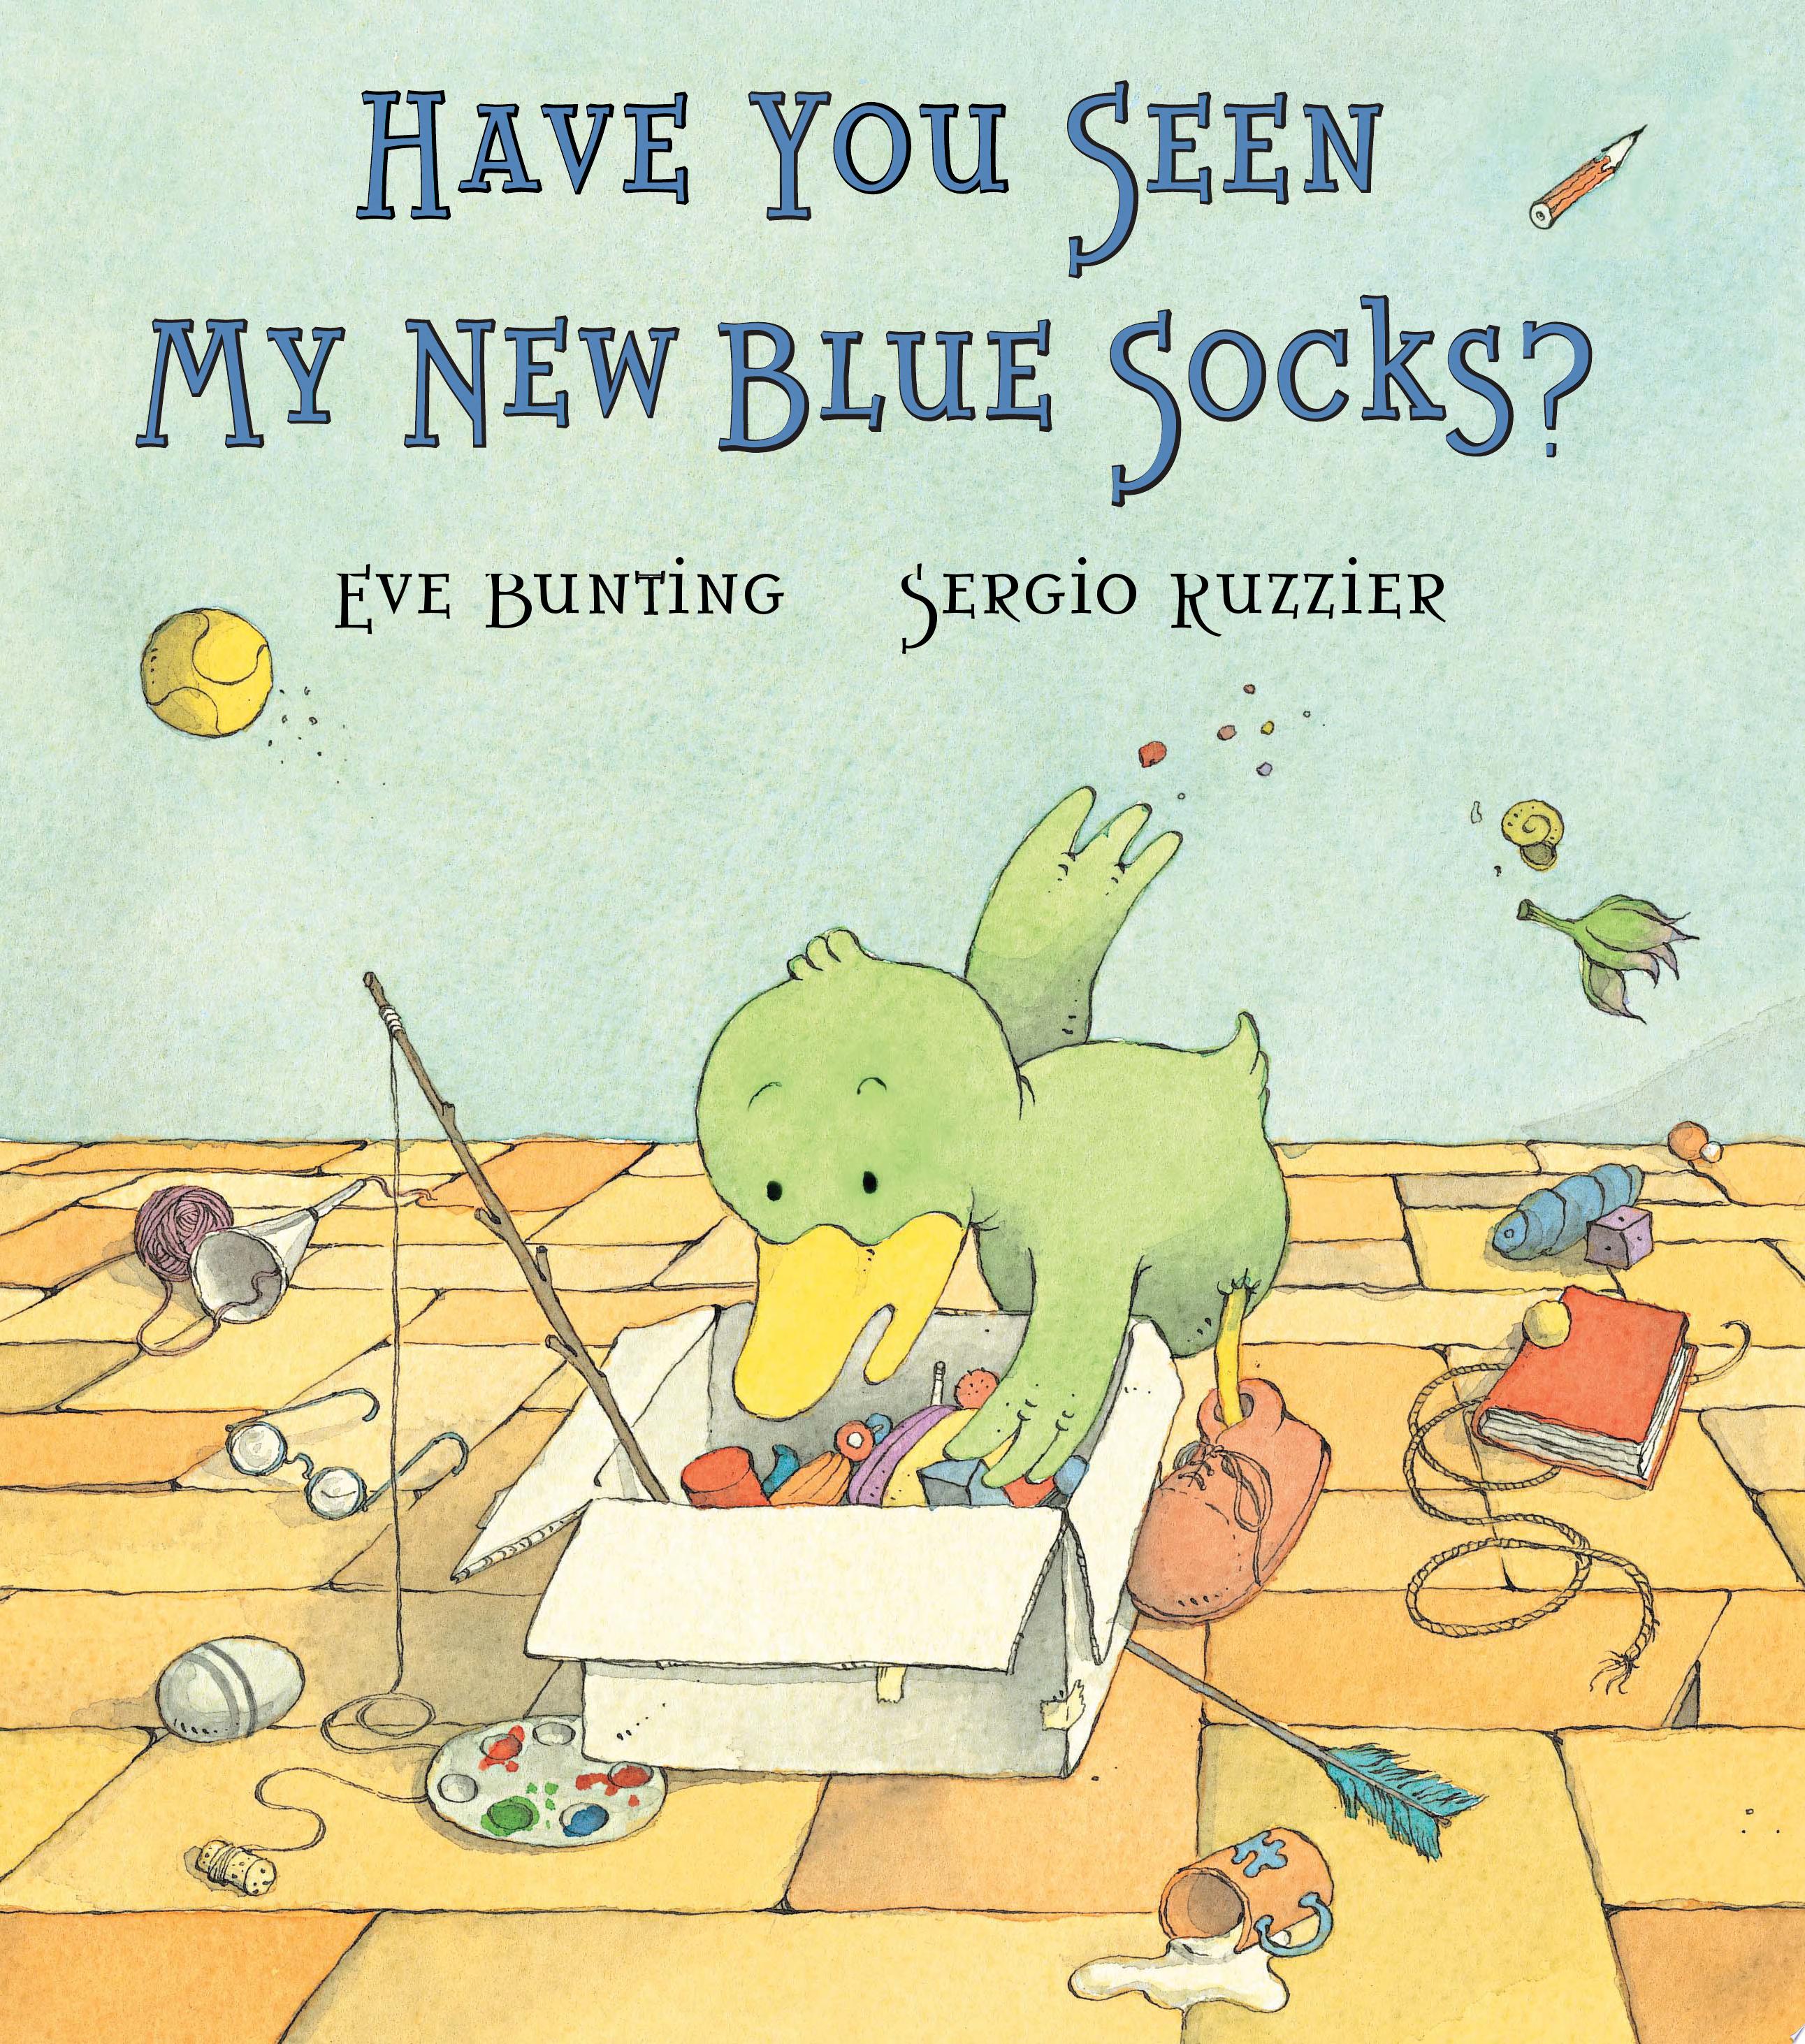 Image for "Have You Seen My New Blue Socks?"